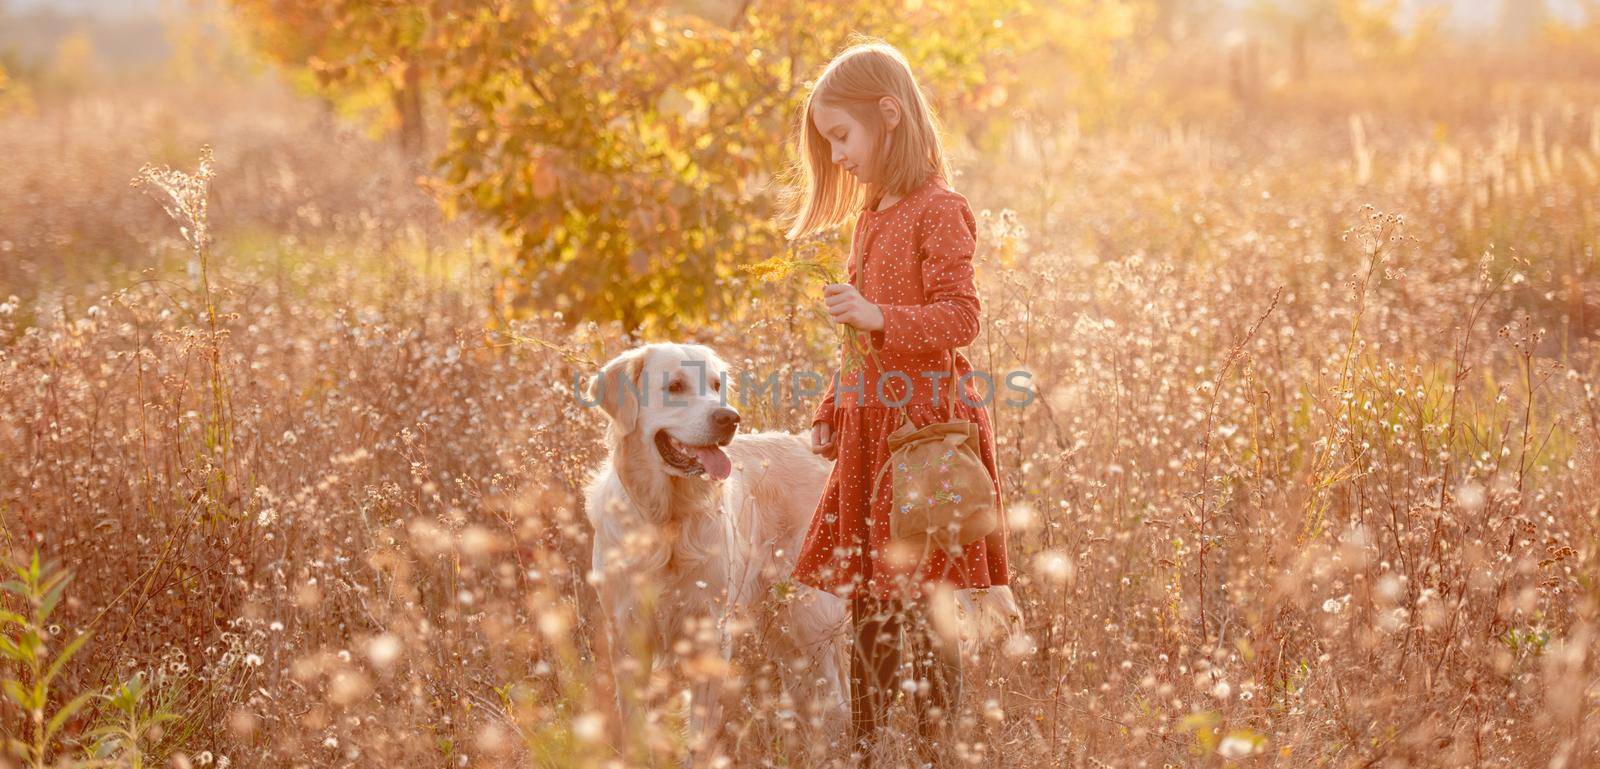 Little girl with dog in autumn nature by tan4ikk1